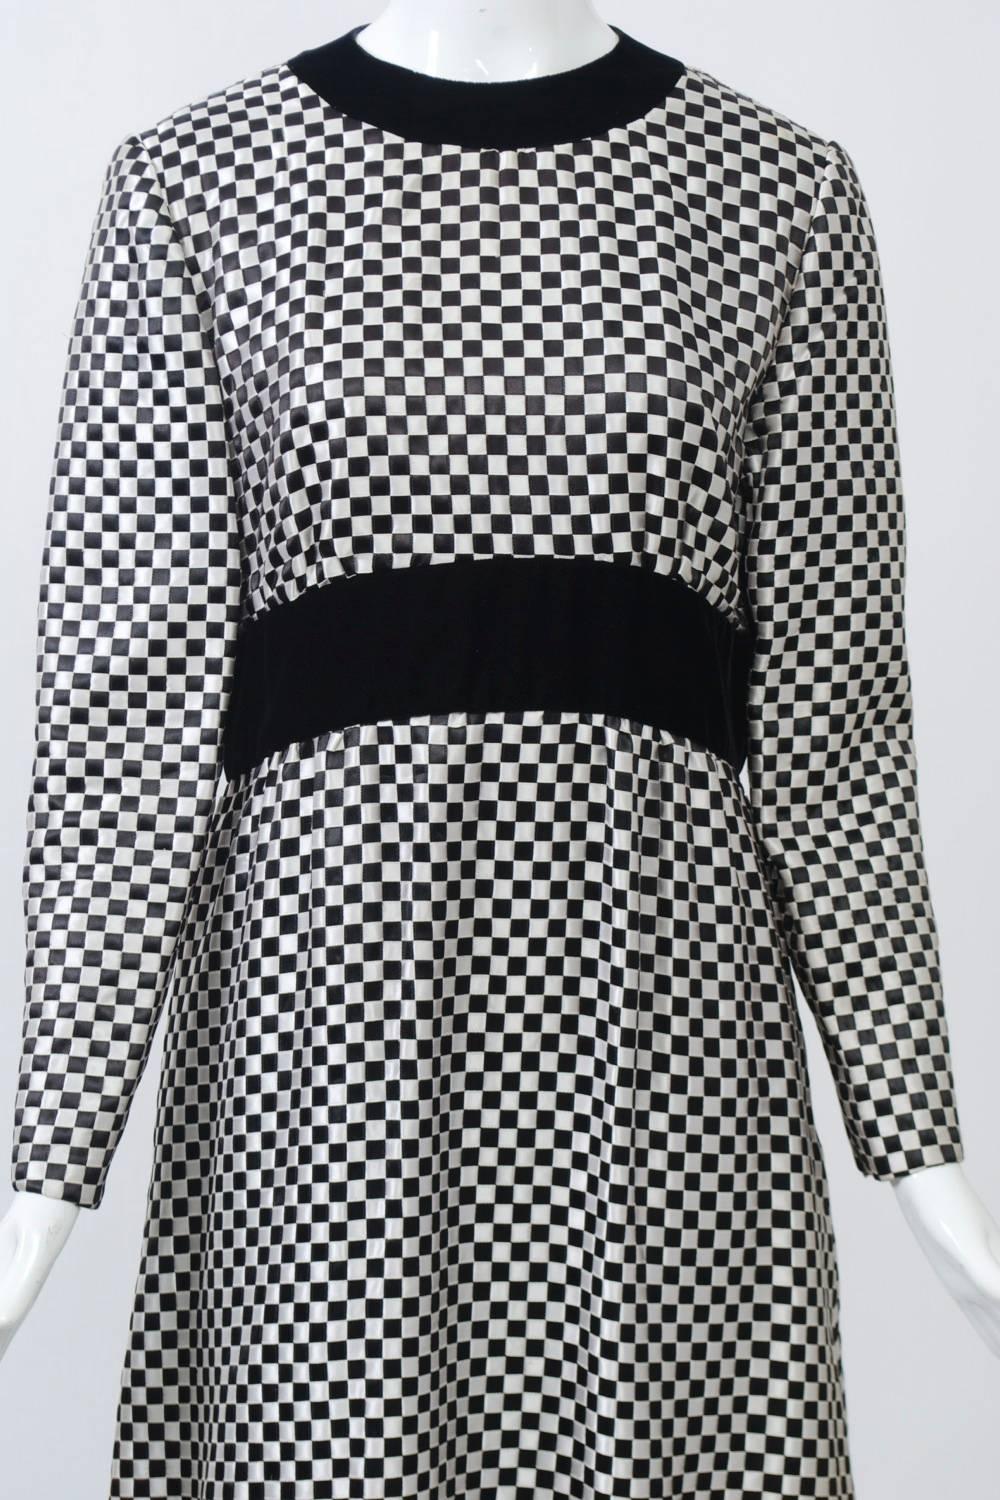 Black and White Ribbon Dress In Excellent Condition For Sale In Alford, MA